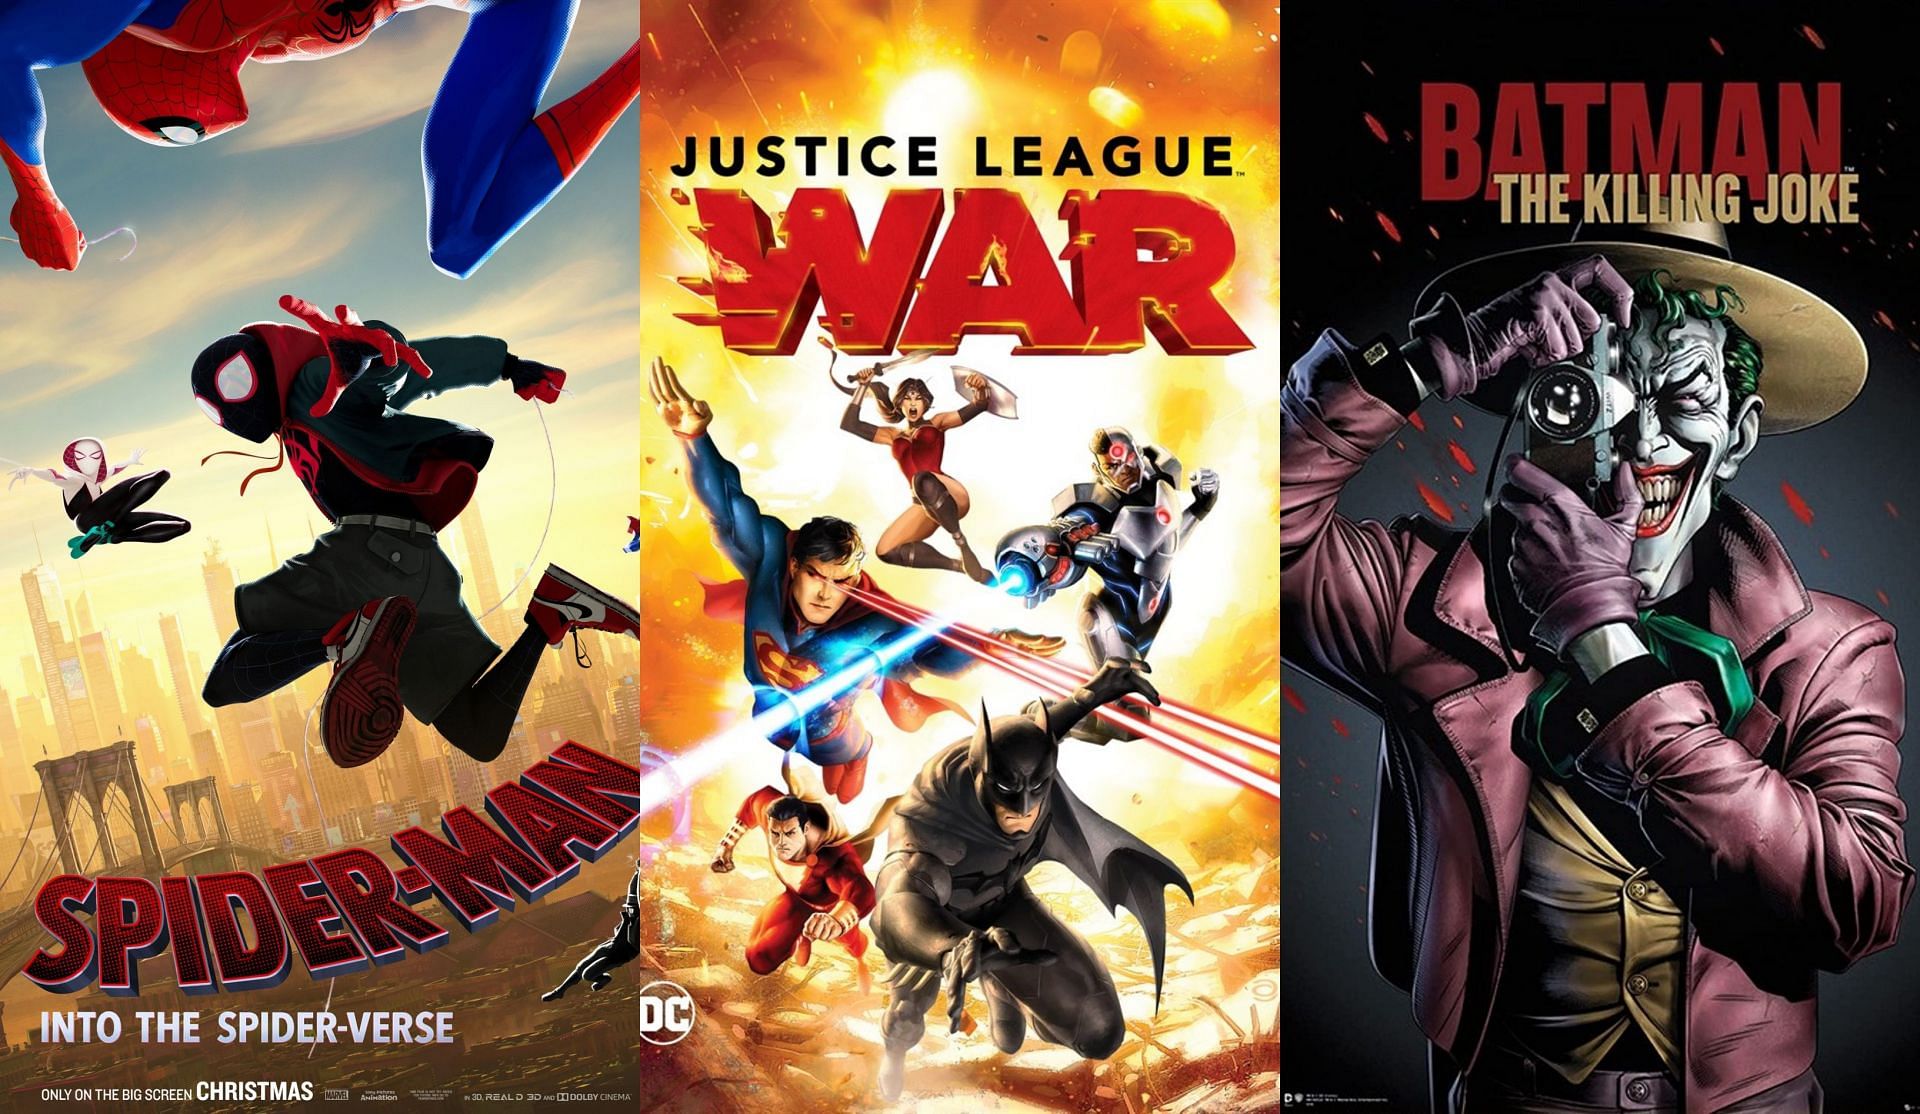 Animated comic book movies have enjoyed a resurgence in popularity (Image by Sony Pictures/Warner Bros.)